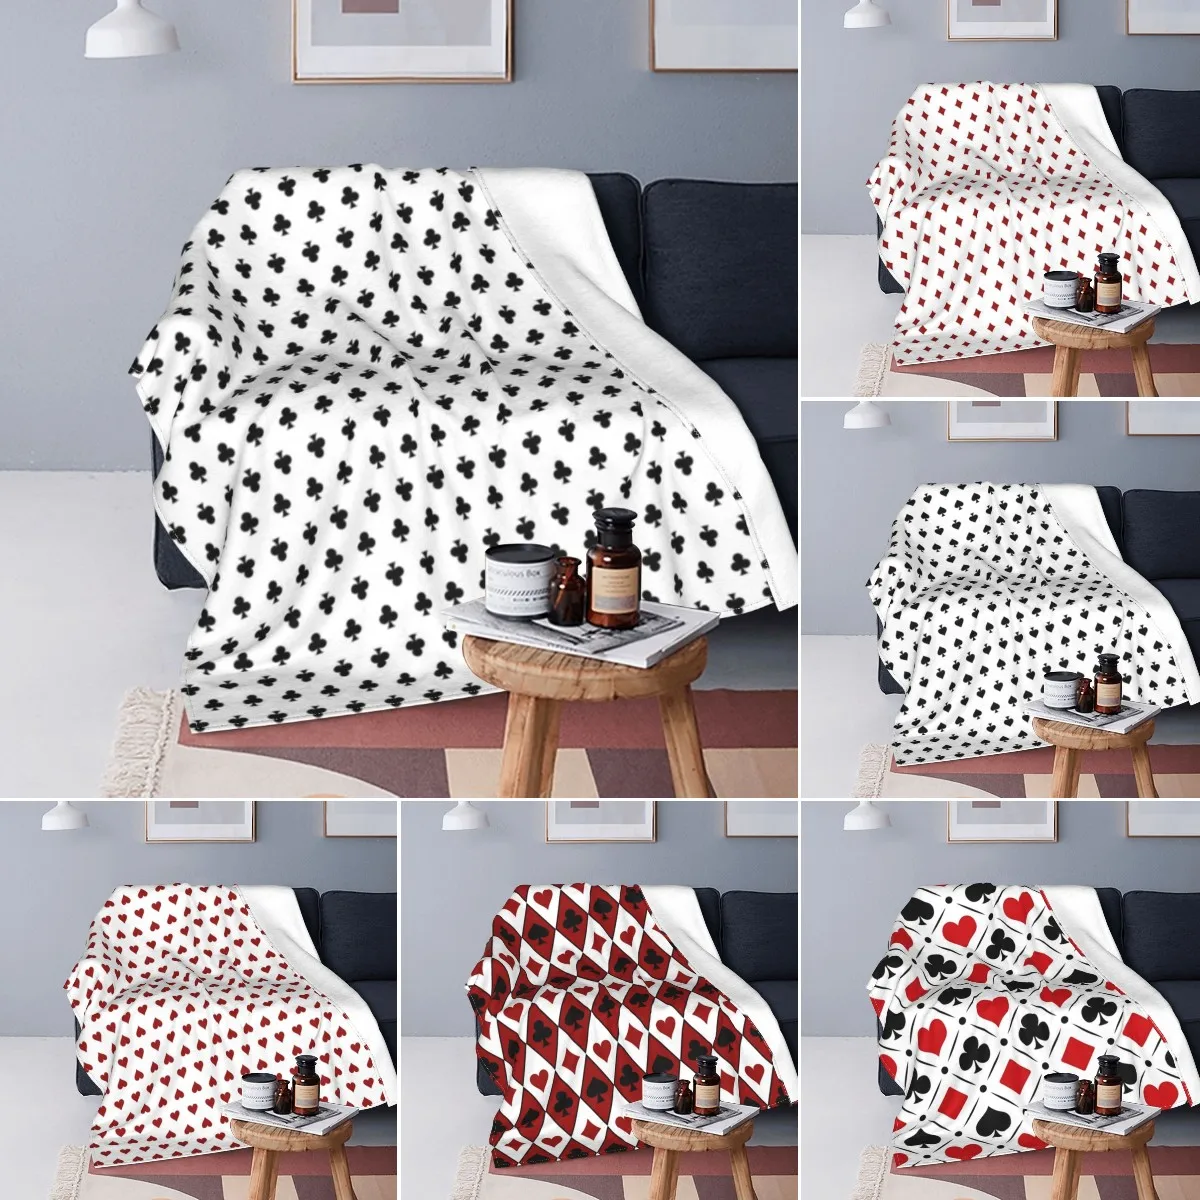 

Playing Poker Card Flannel Throw Blanket Hearts Square Clubs Spades Fashion Cozy Bedspread Fleece Travel Super Soft Blanket King